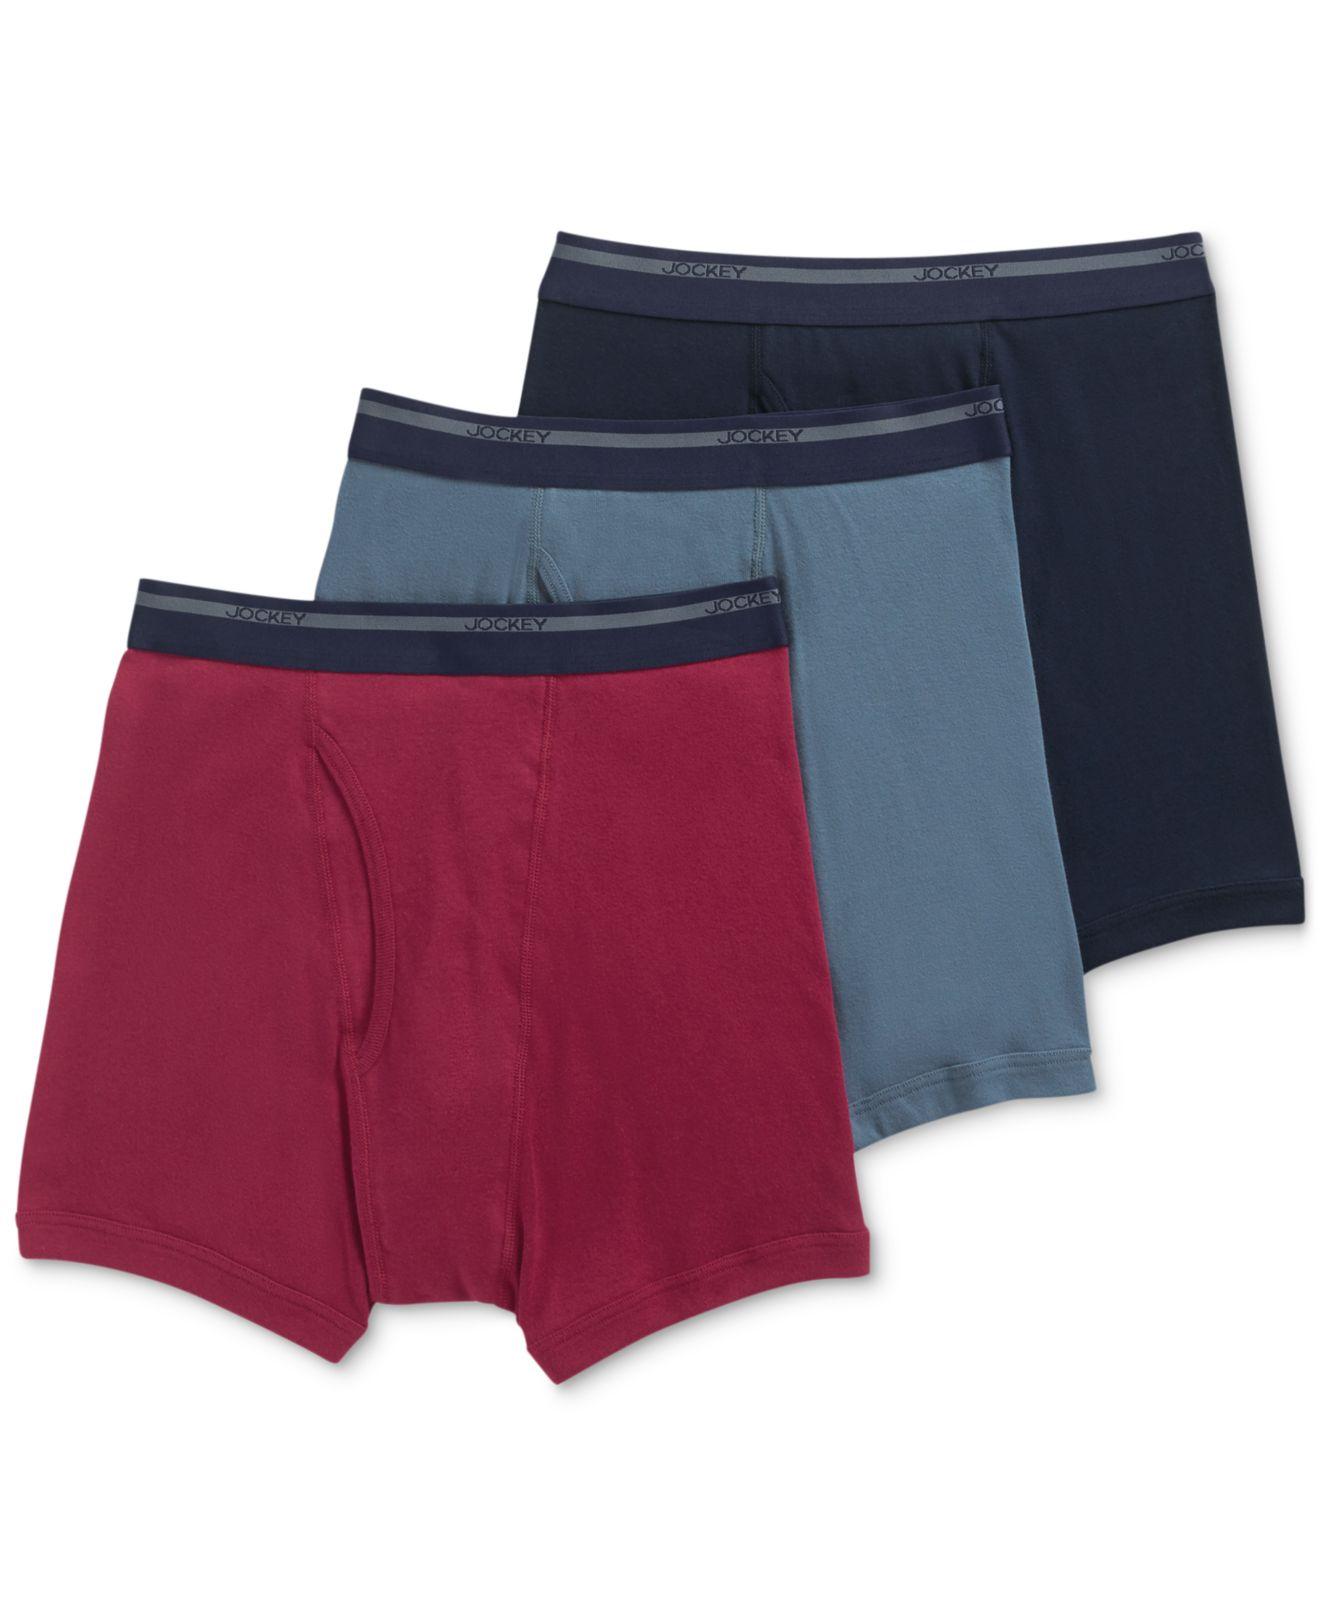 Lyst - Jockey Men's Classic 3 Pack Cotton Boxer Briefs in Red for Men